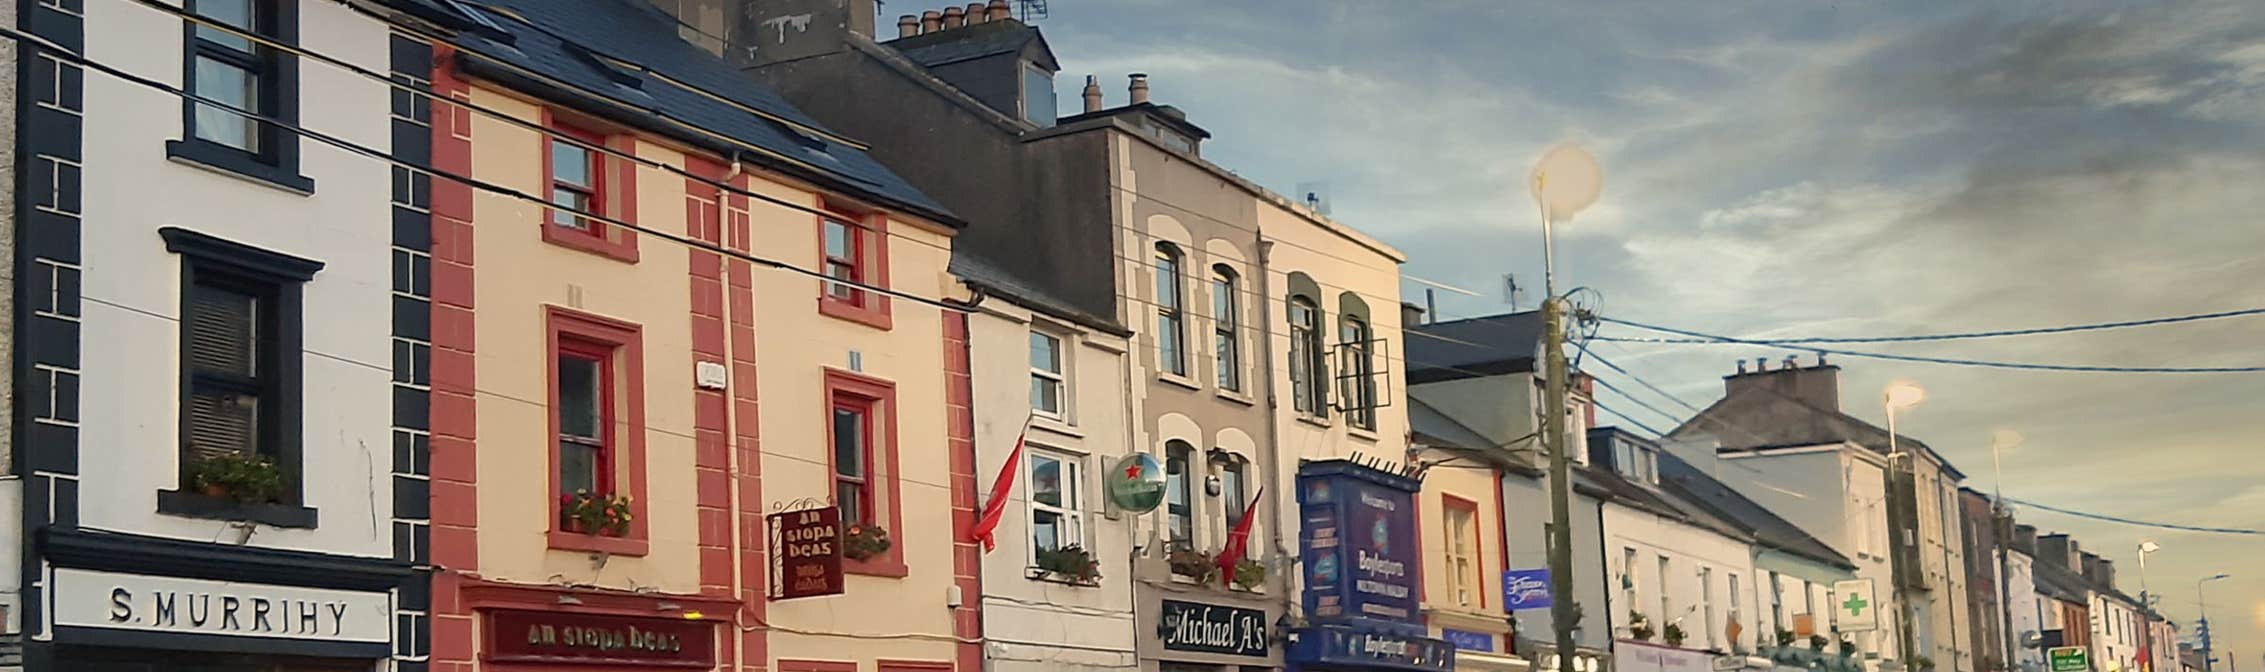 Image of Miltown Malbay town in County Clare